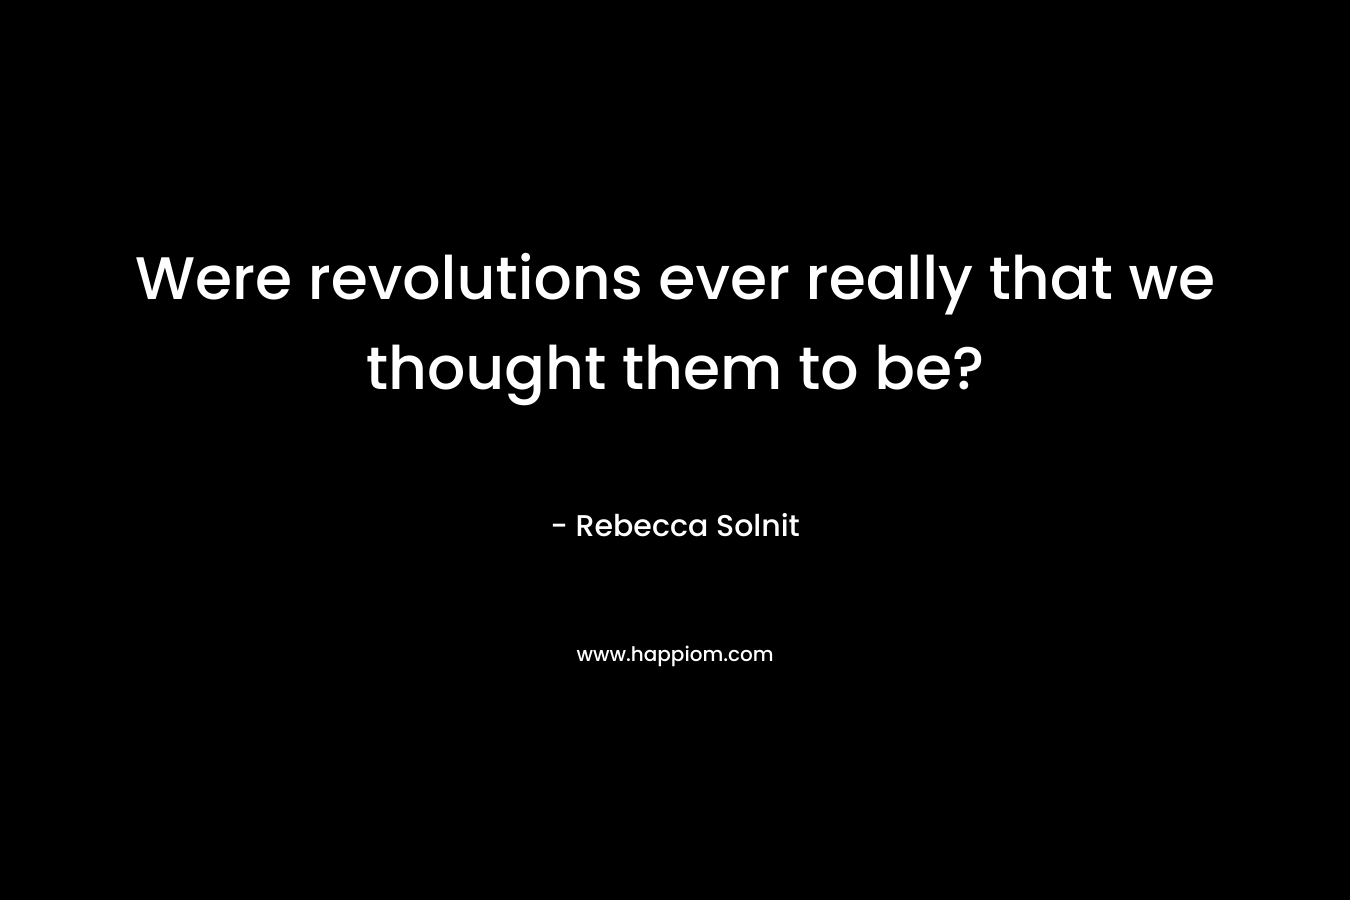 Were revolutions ever really that we thought them to be?